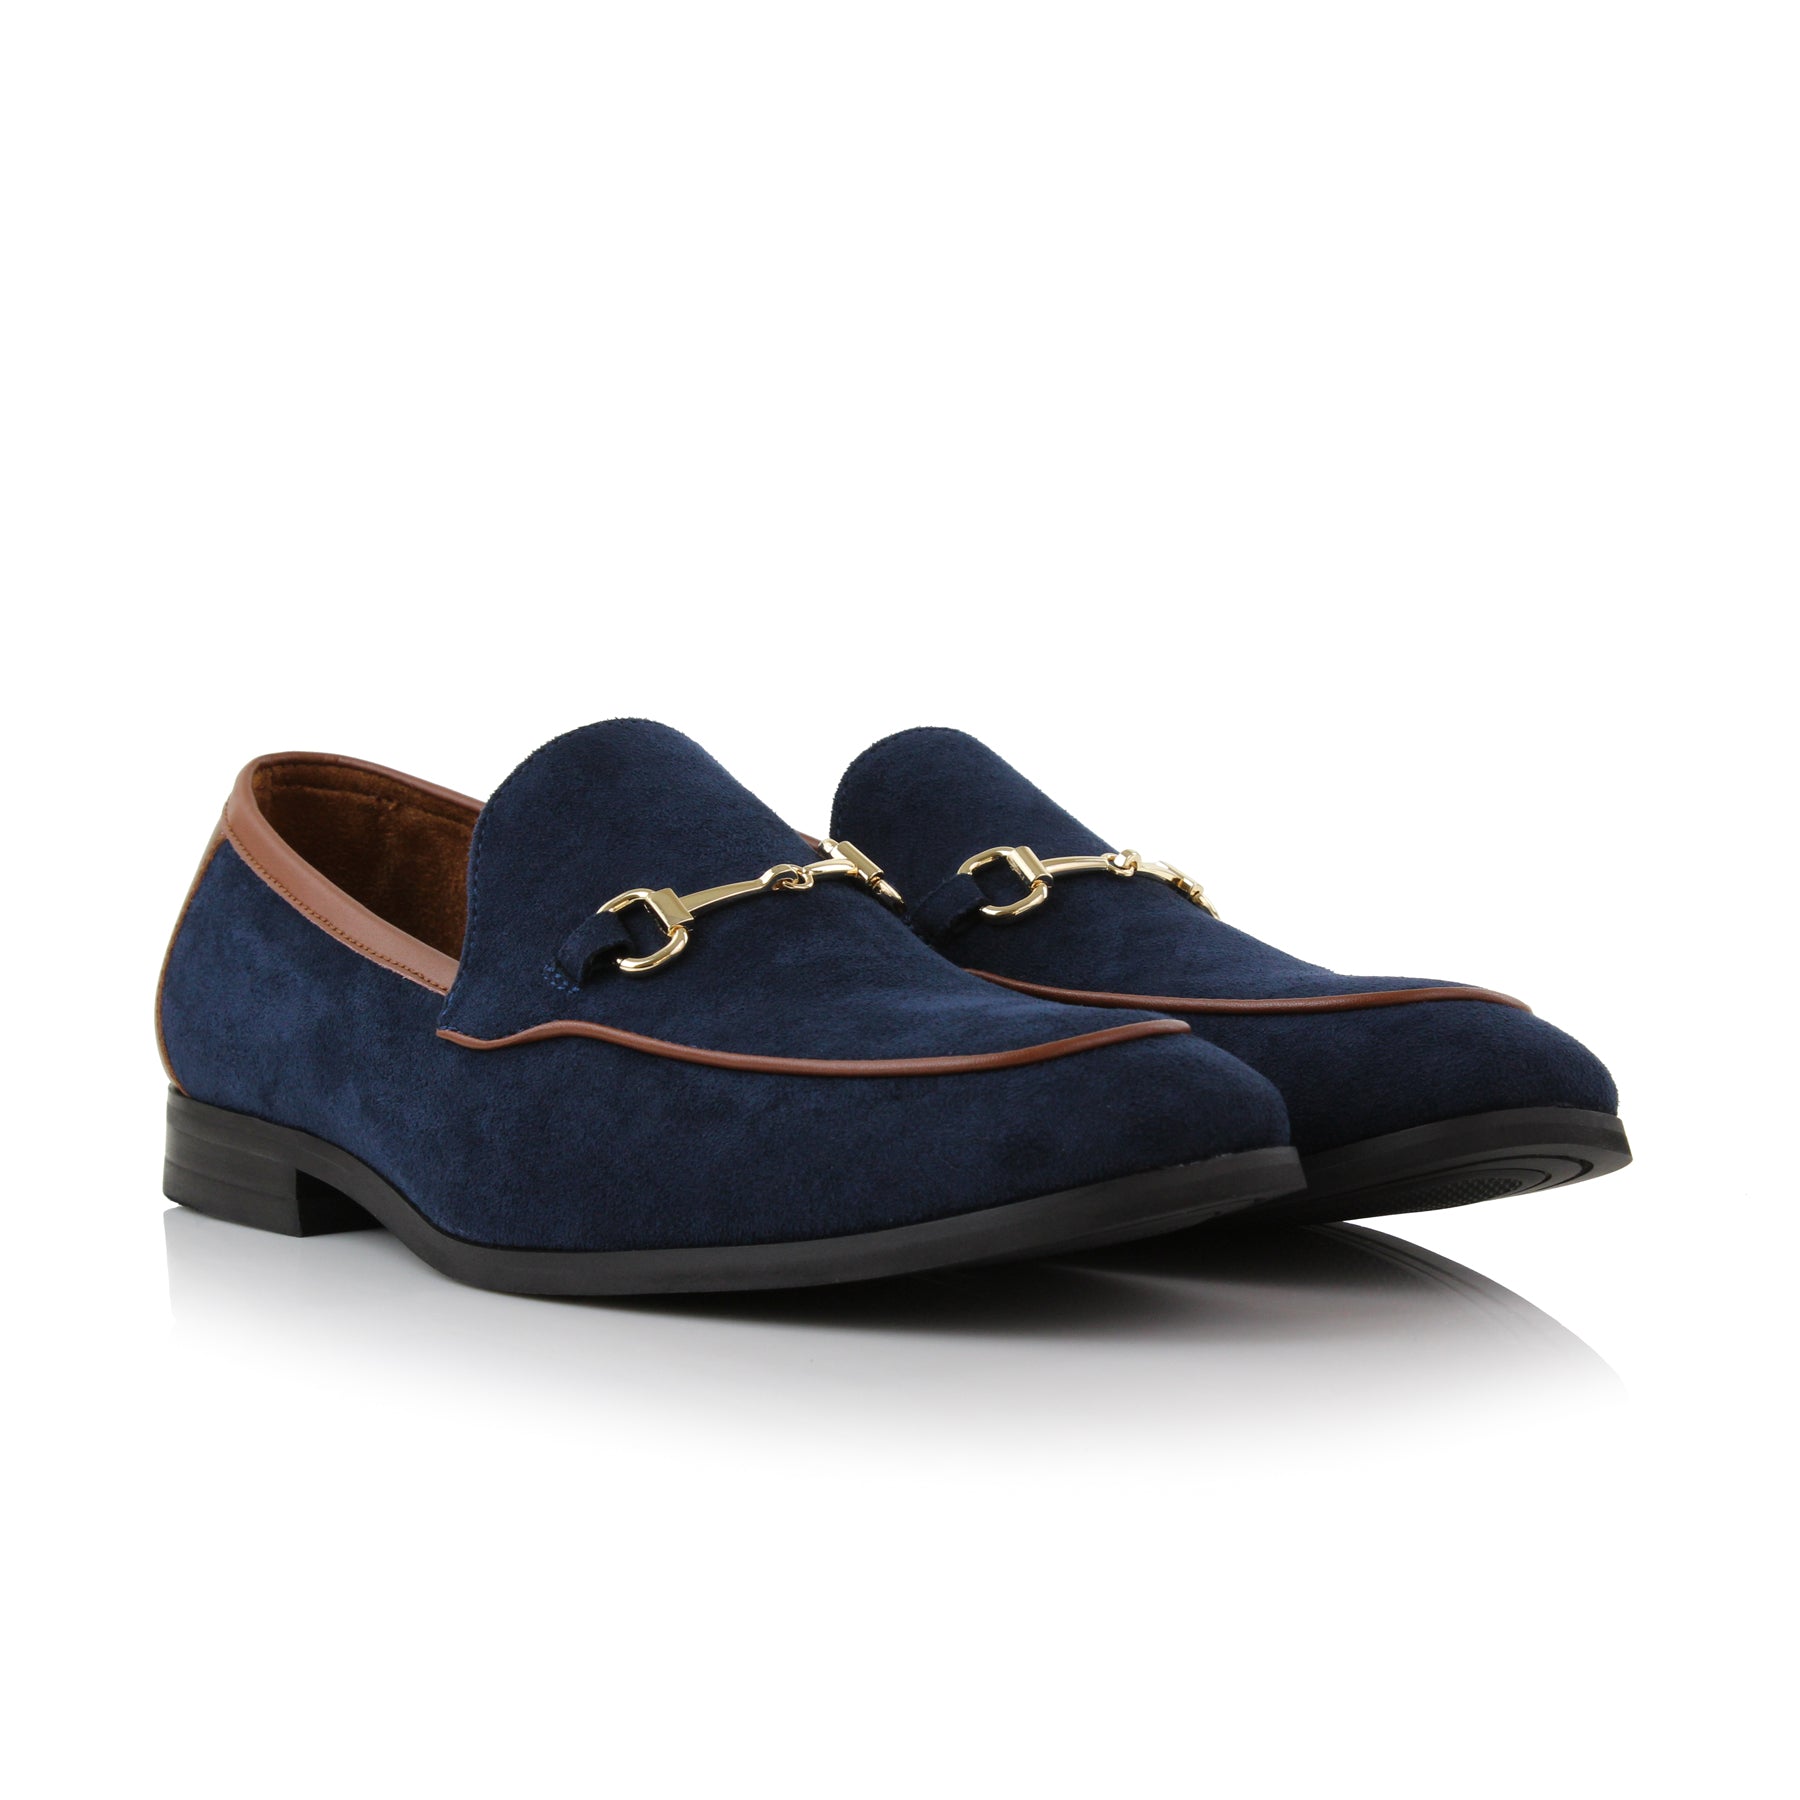 Buckled Suede Loafers | Dante by Ferro Aldo | Conal Footwear | Paired Angle View